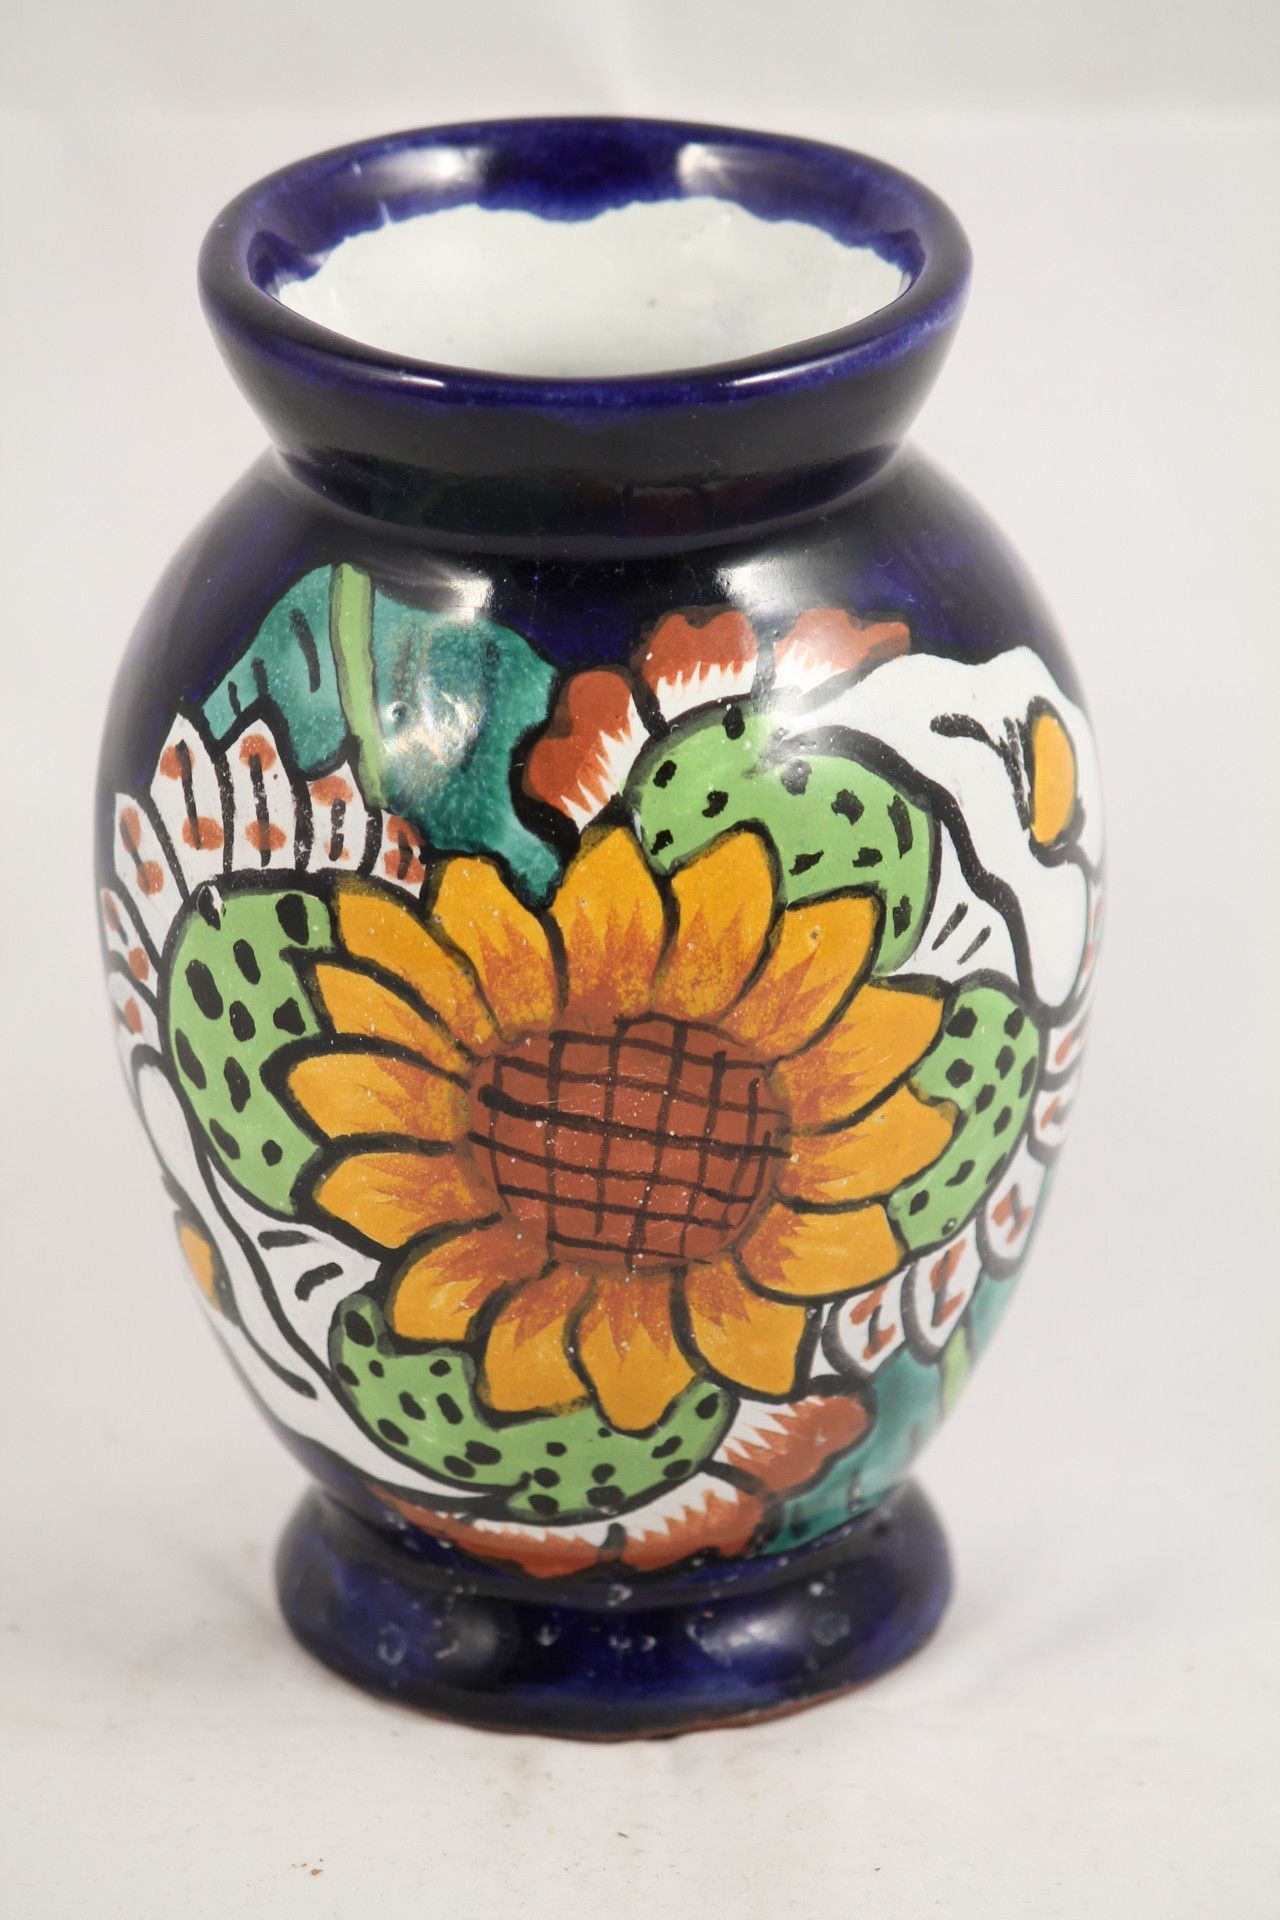 15 Ideal Mirror Flower Vase 2024 free download mirror flower vase of mirror flower vase photos small hand painted mexican ceramic flower for mirror flower vase photos small hand painted mexican ceramic flower vase mirror